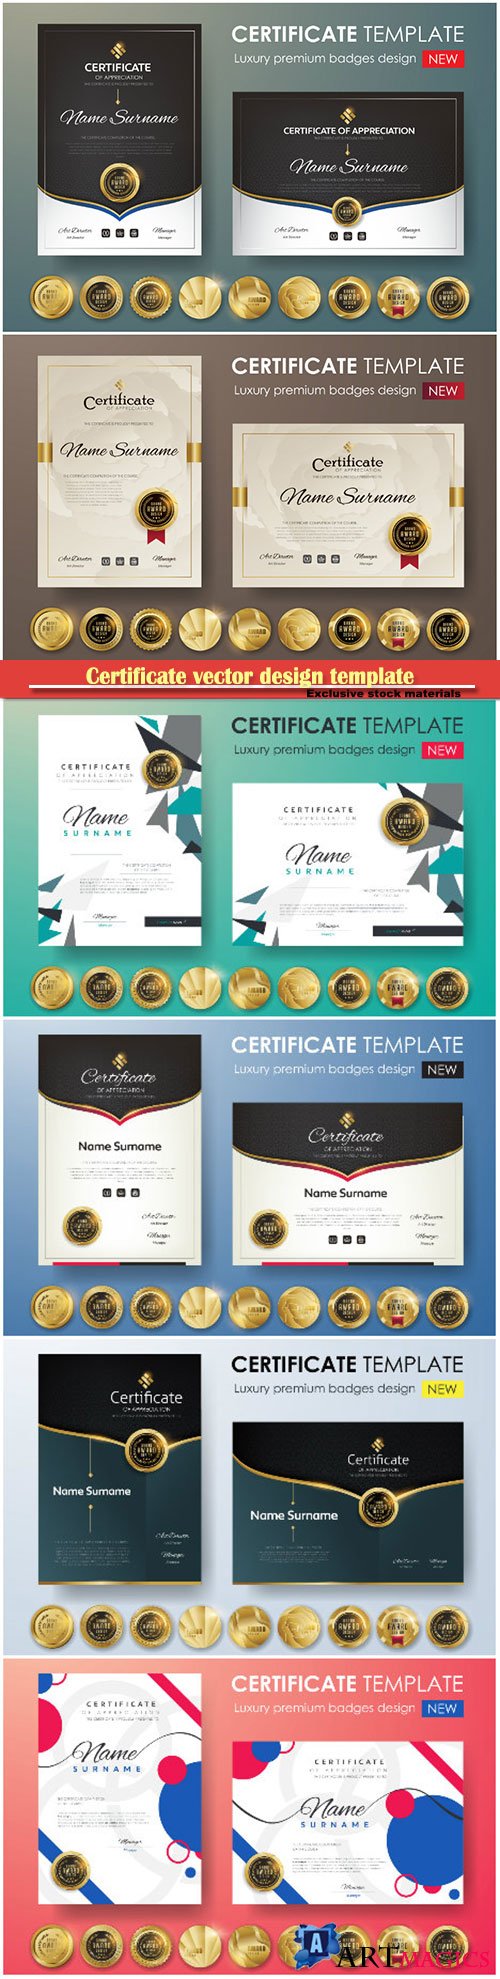 Certificate and vector diploma design template # 61